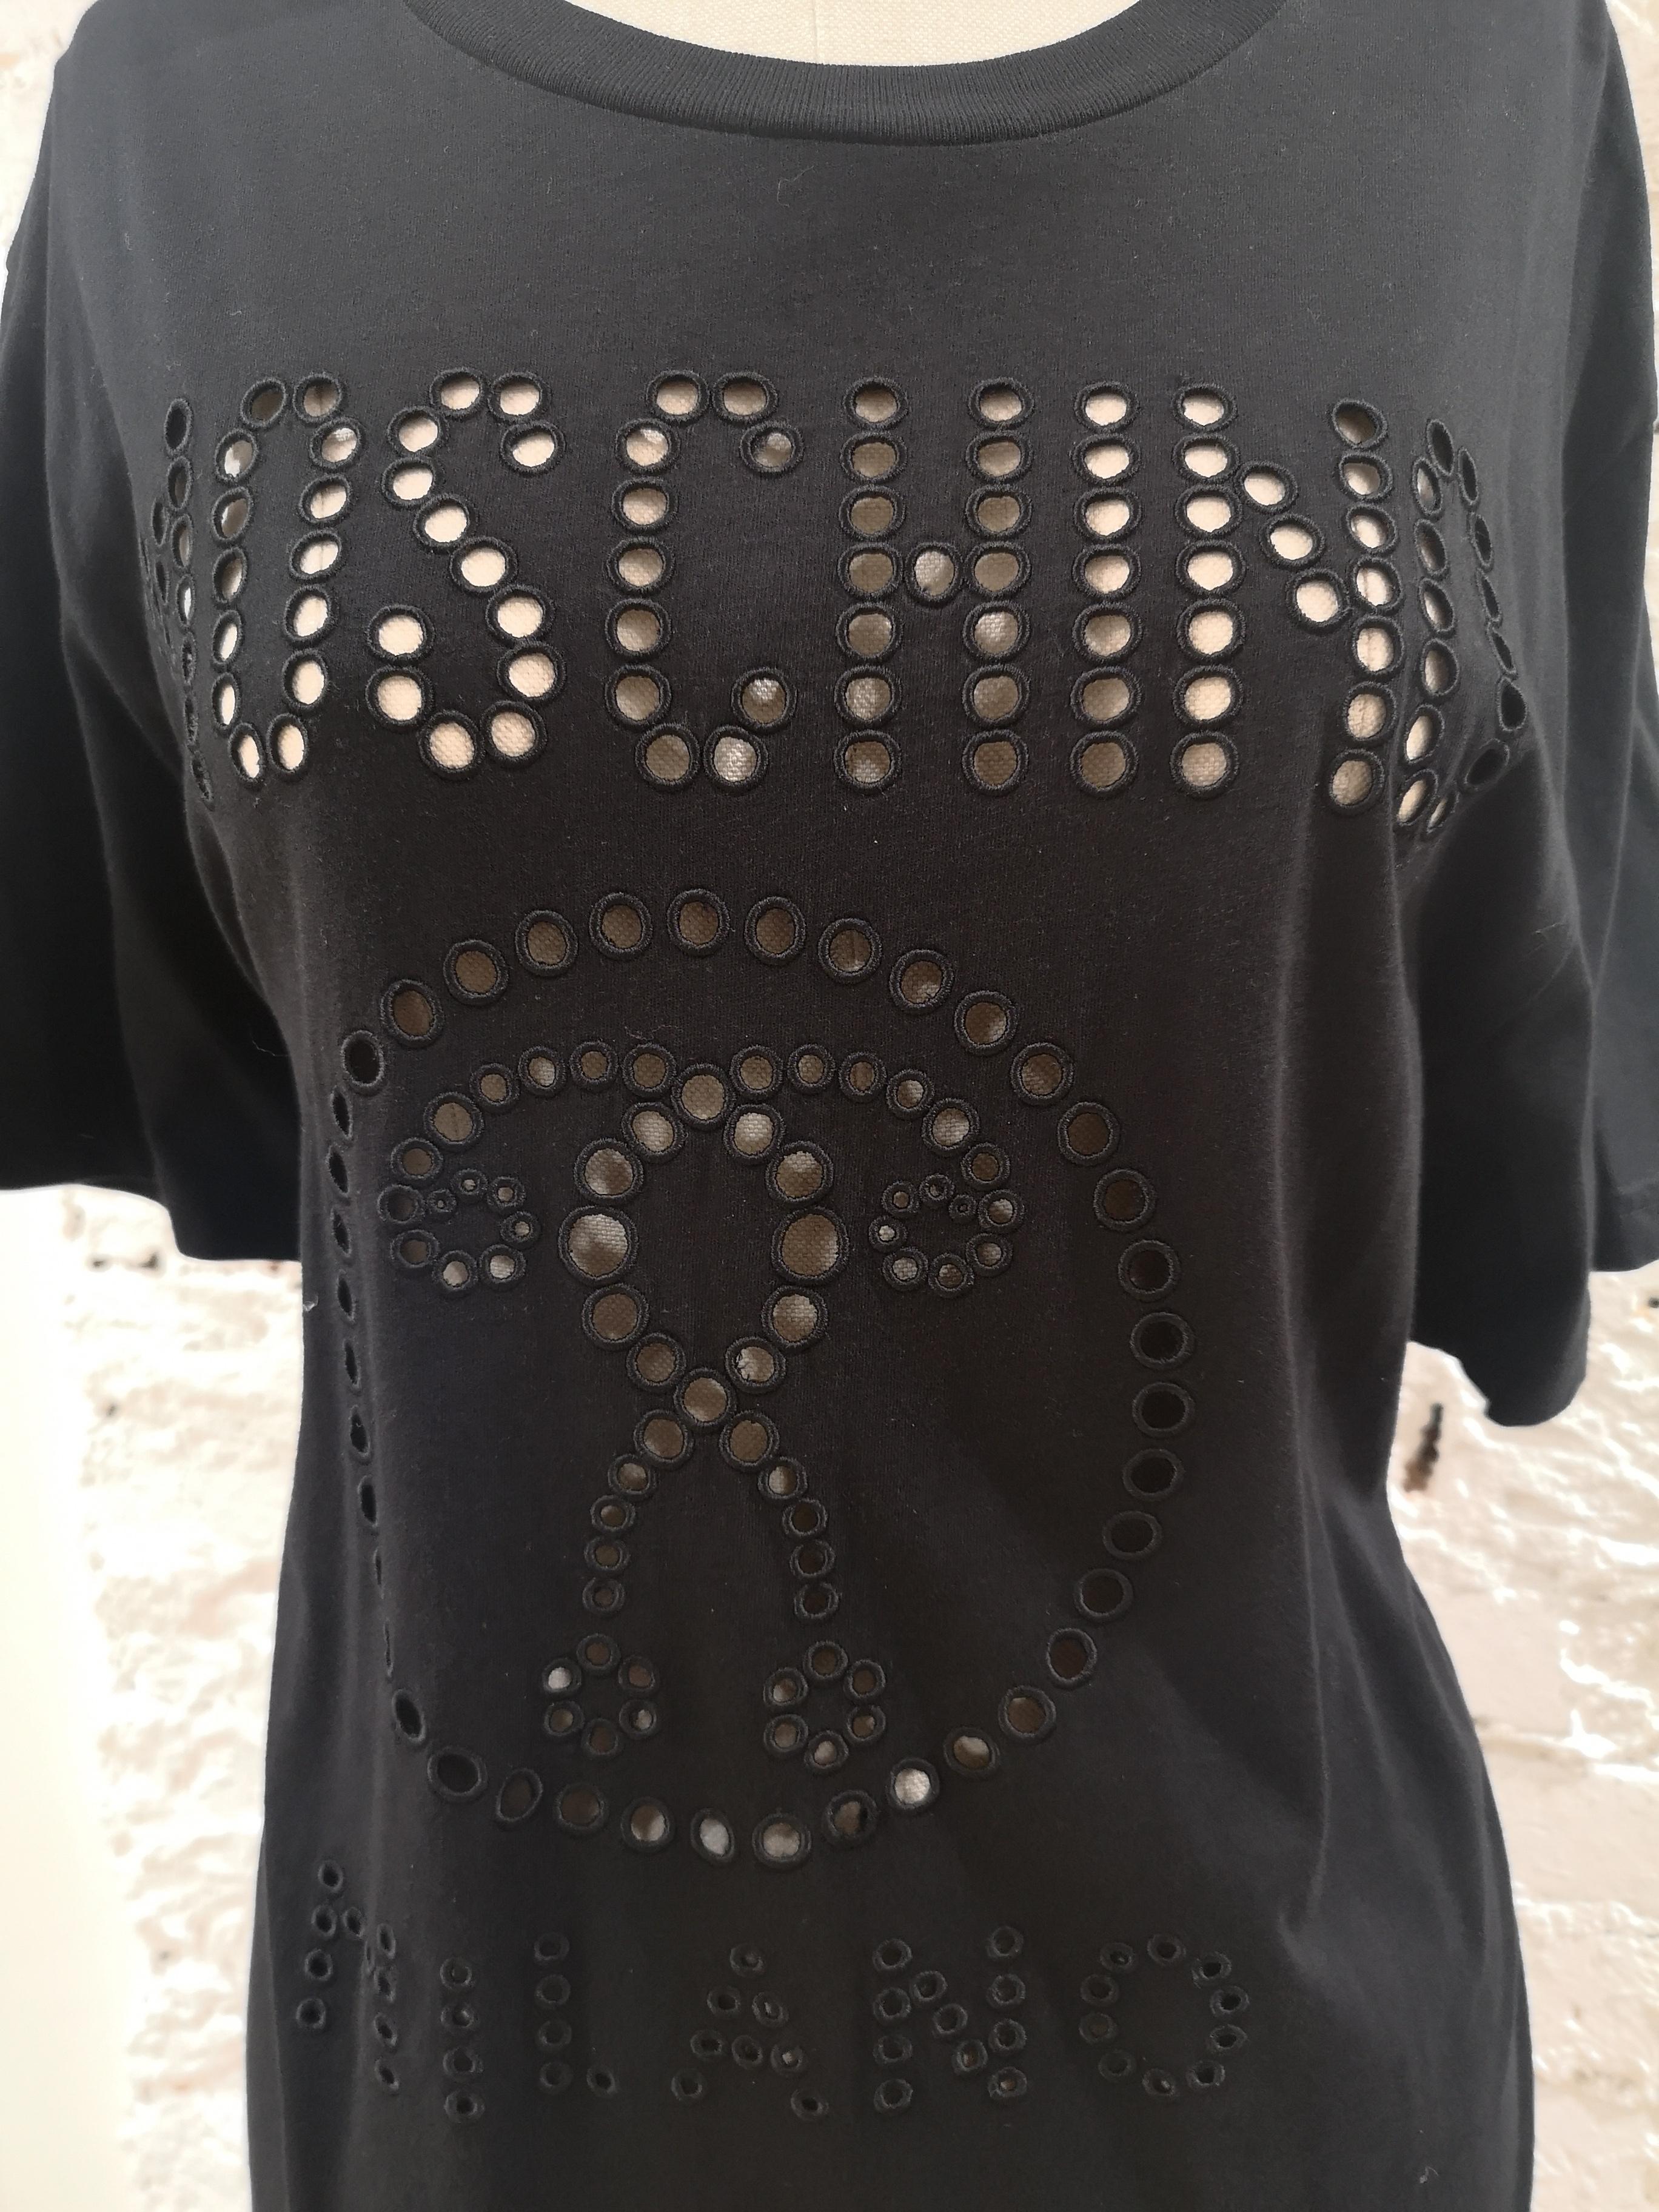 Moschino Couture Black cotton T-shirt NWOT
totally made in italy in size L 
composition: 100% cotton
total lenght 76 cm
shoulder to hem 22 cm